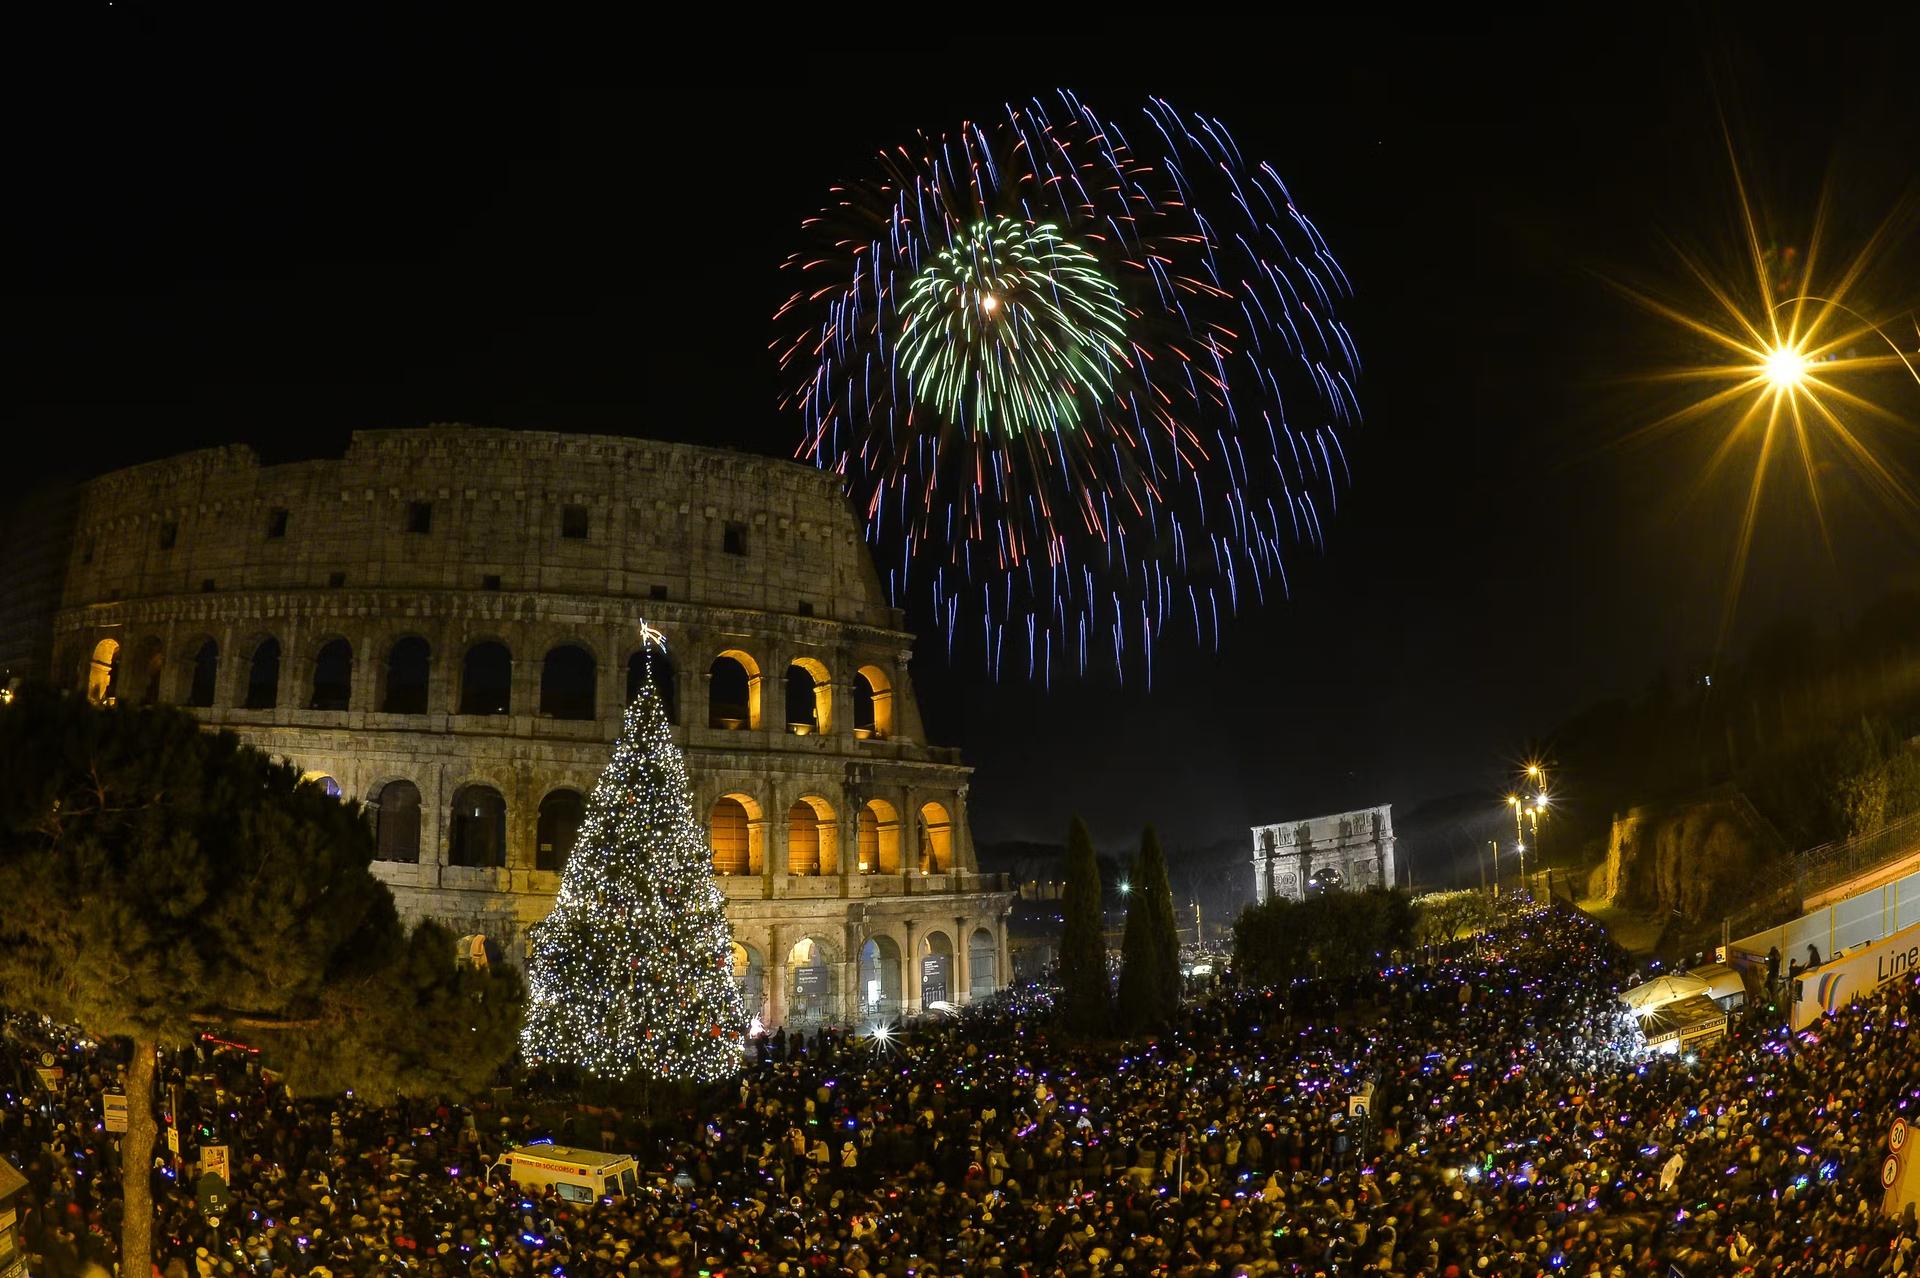 People cheer in front of Rome's ancient Colosseum as fireworks explode to celebrate the new year 